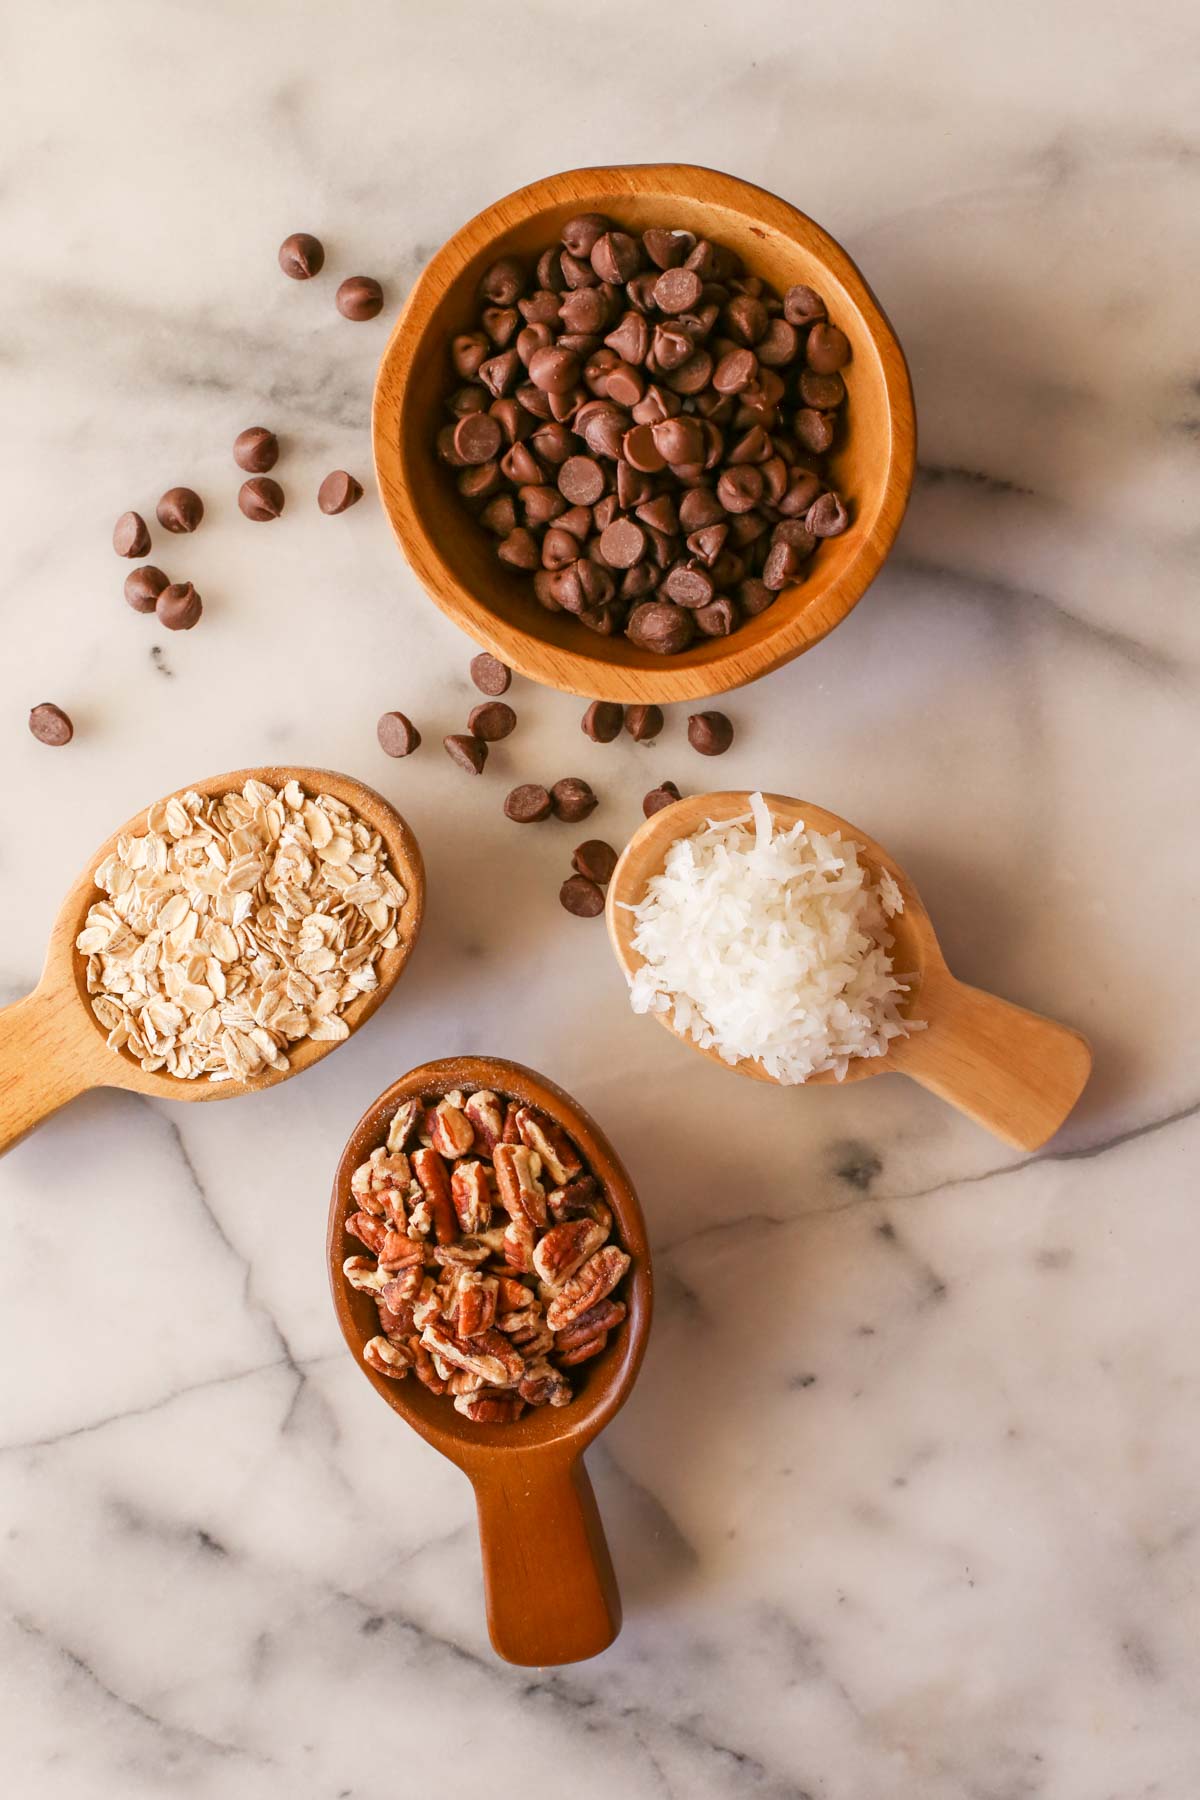 Overhead shot of a wood bowl of chocolate chips, with some of the chocolate chips next to the bowl, a small wood scoop of rolled oats, a small wood scoop of pecans, and a small wood scoop of shredded coconut, all on a marble background. 